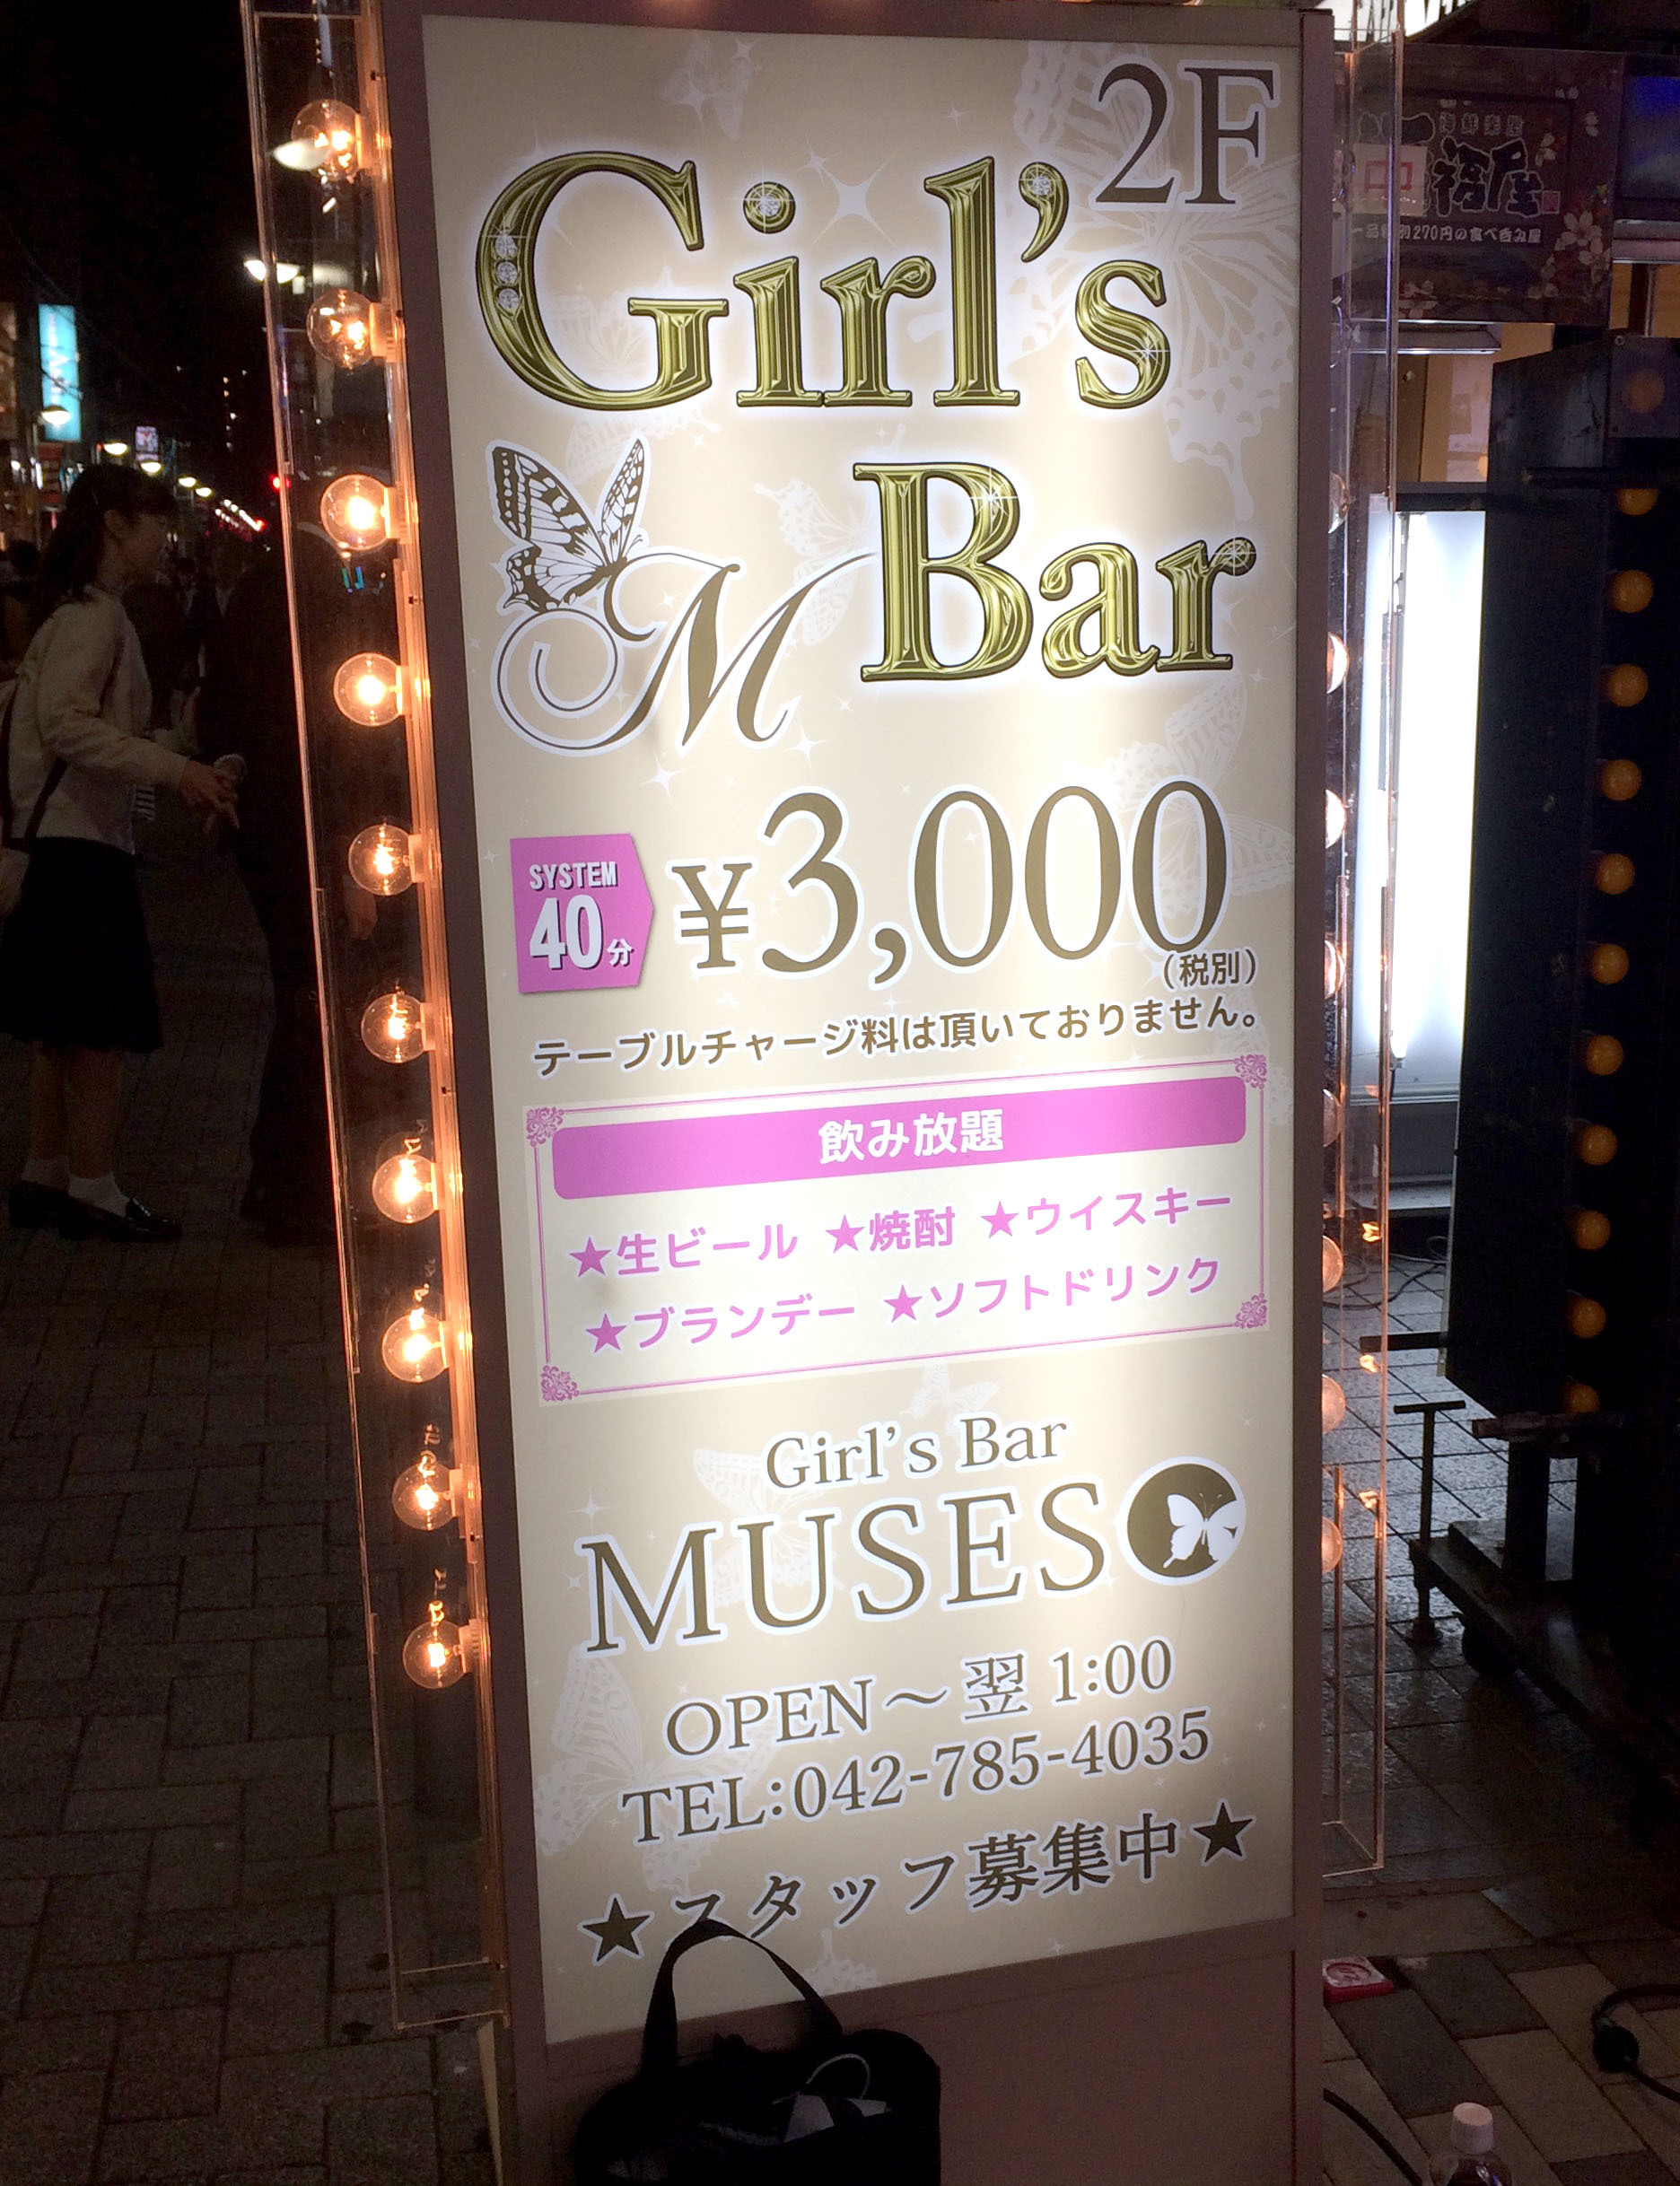 Muses 町田